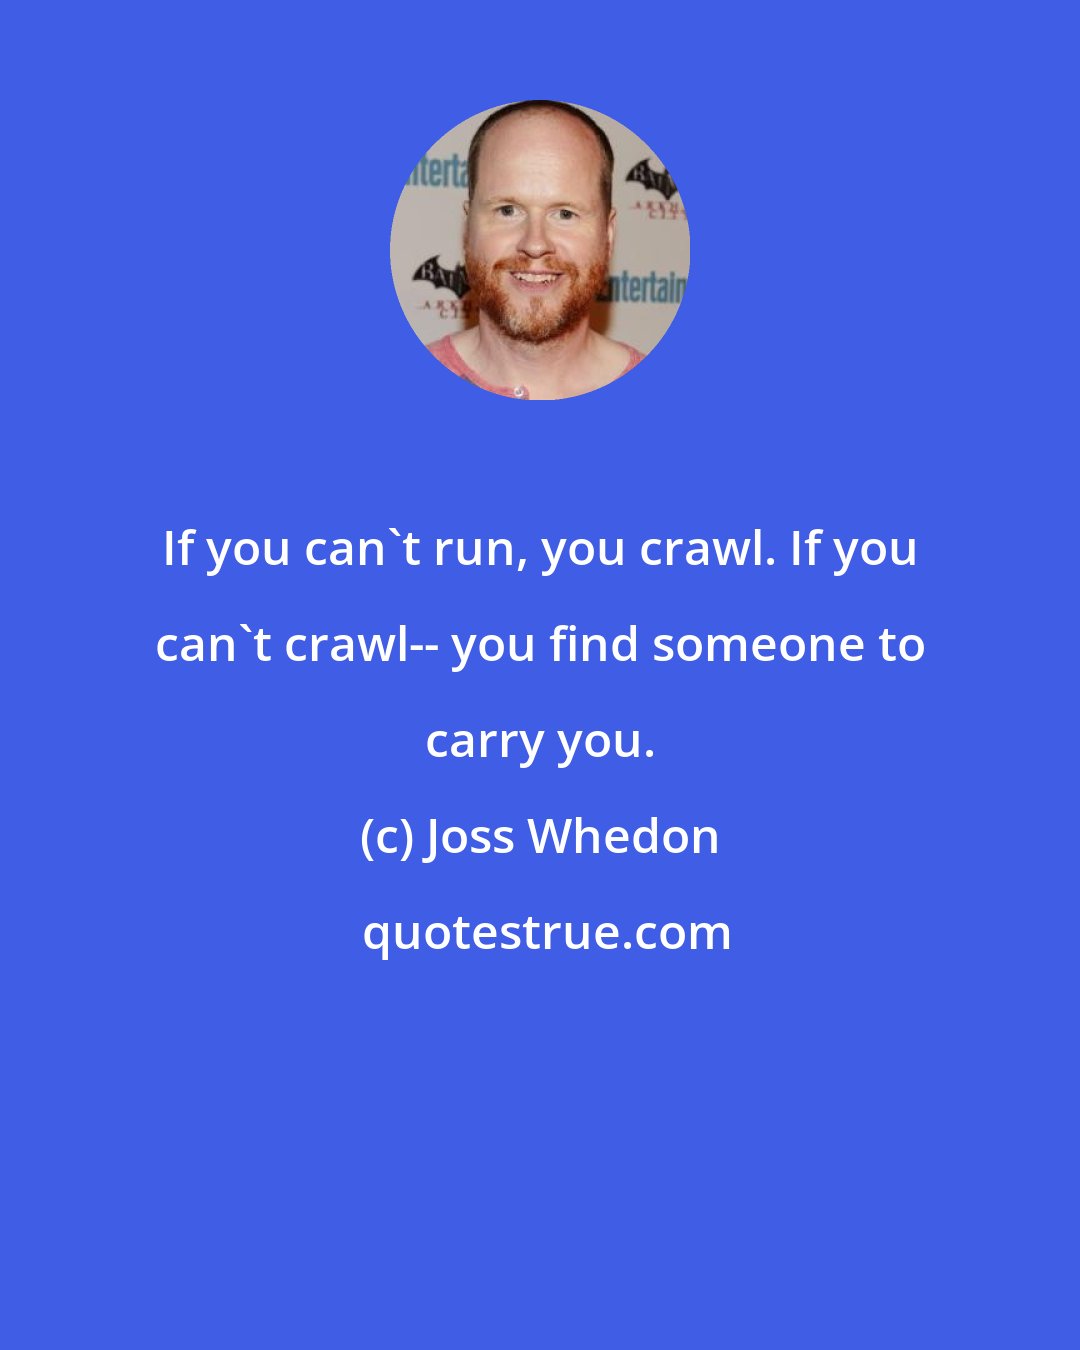 Joss Whedon: If you can't run, you crawl. If you can't crawl-- you find someone to carry you.